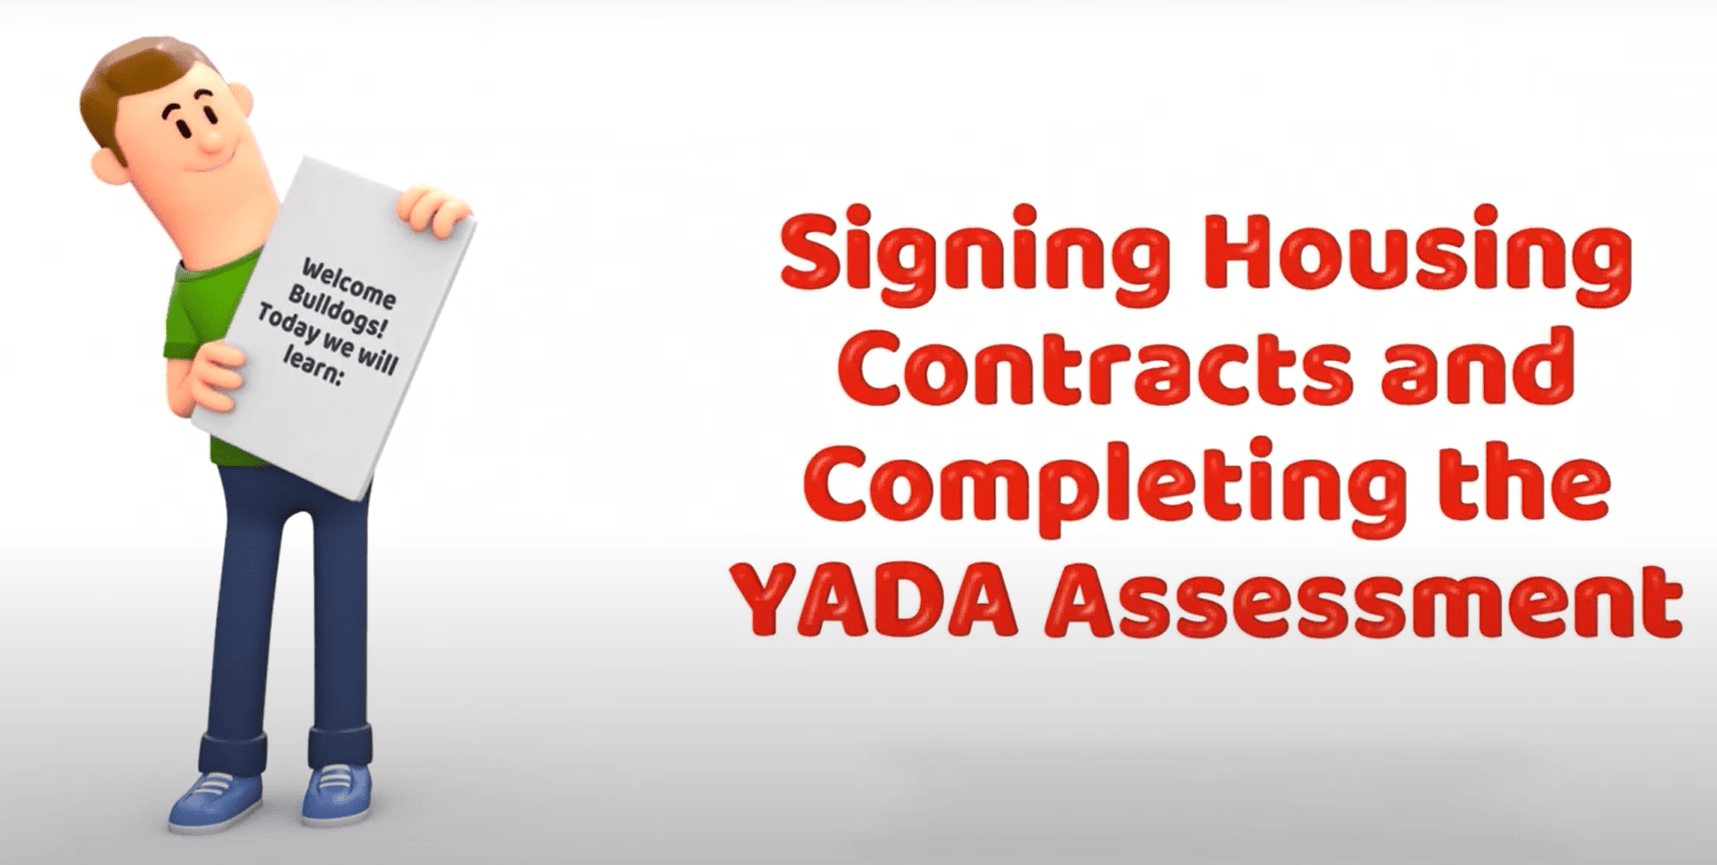 Signing Housing Contracts and Completing the YADA Assessment Tumb Text